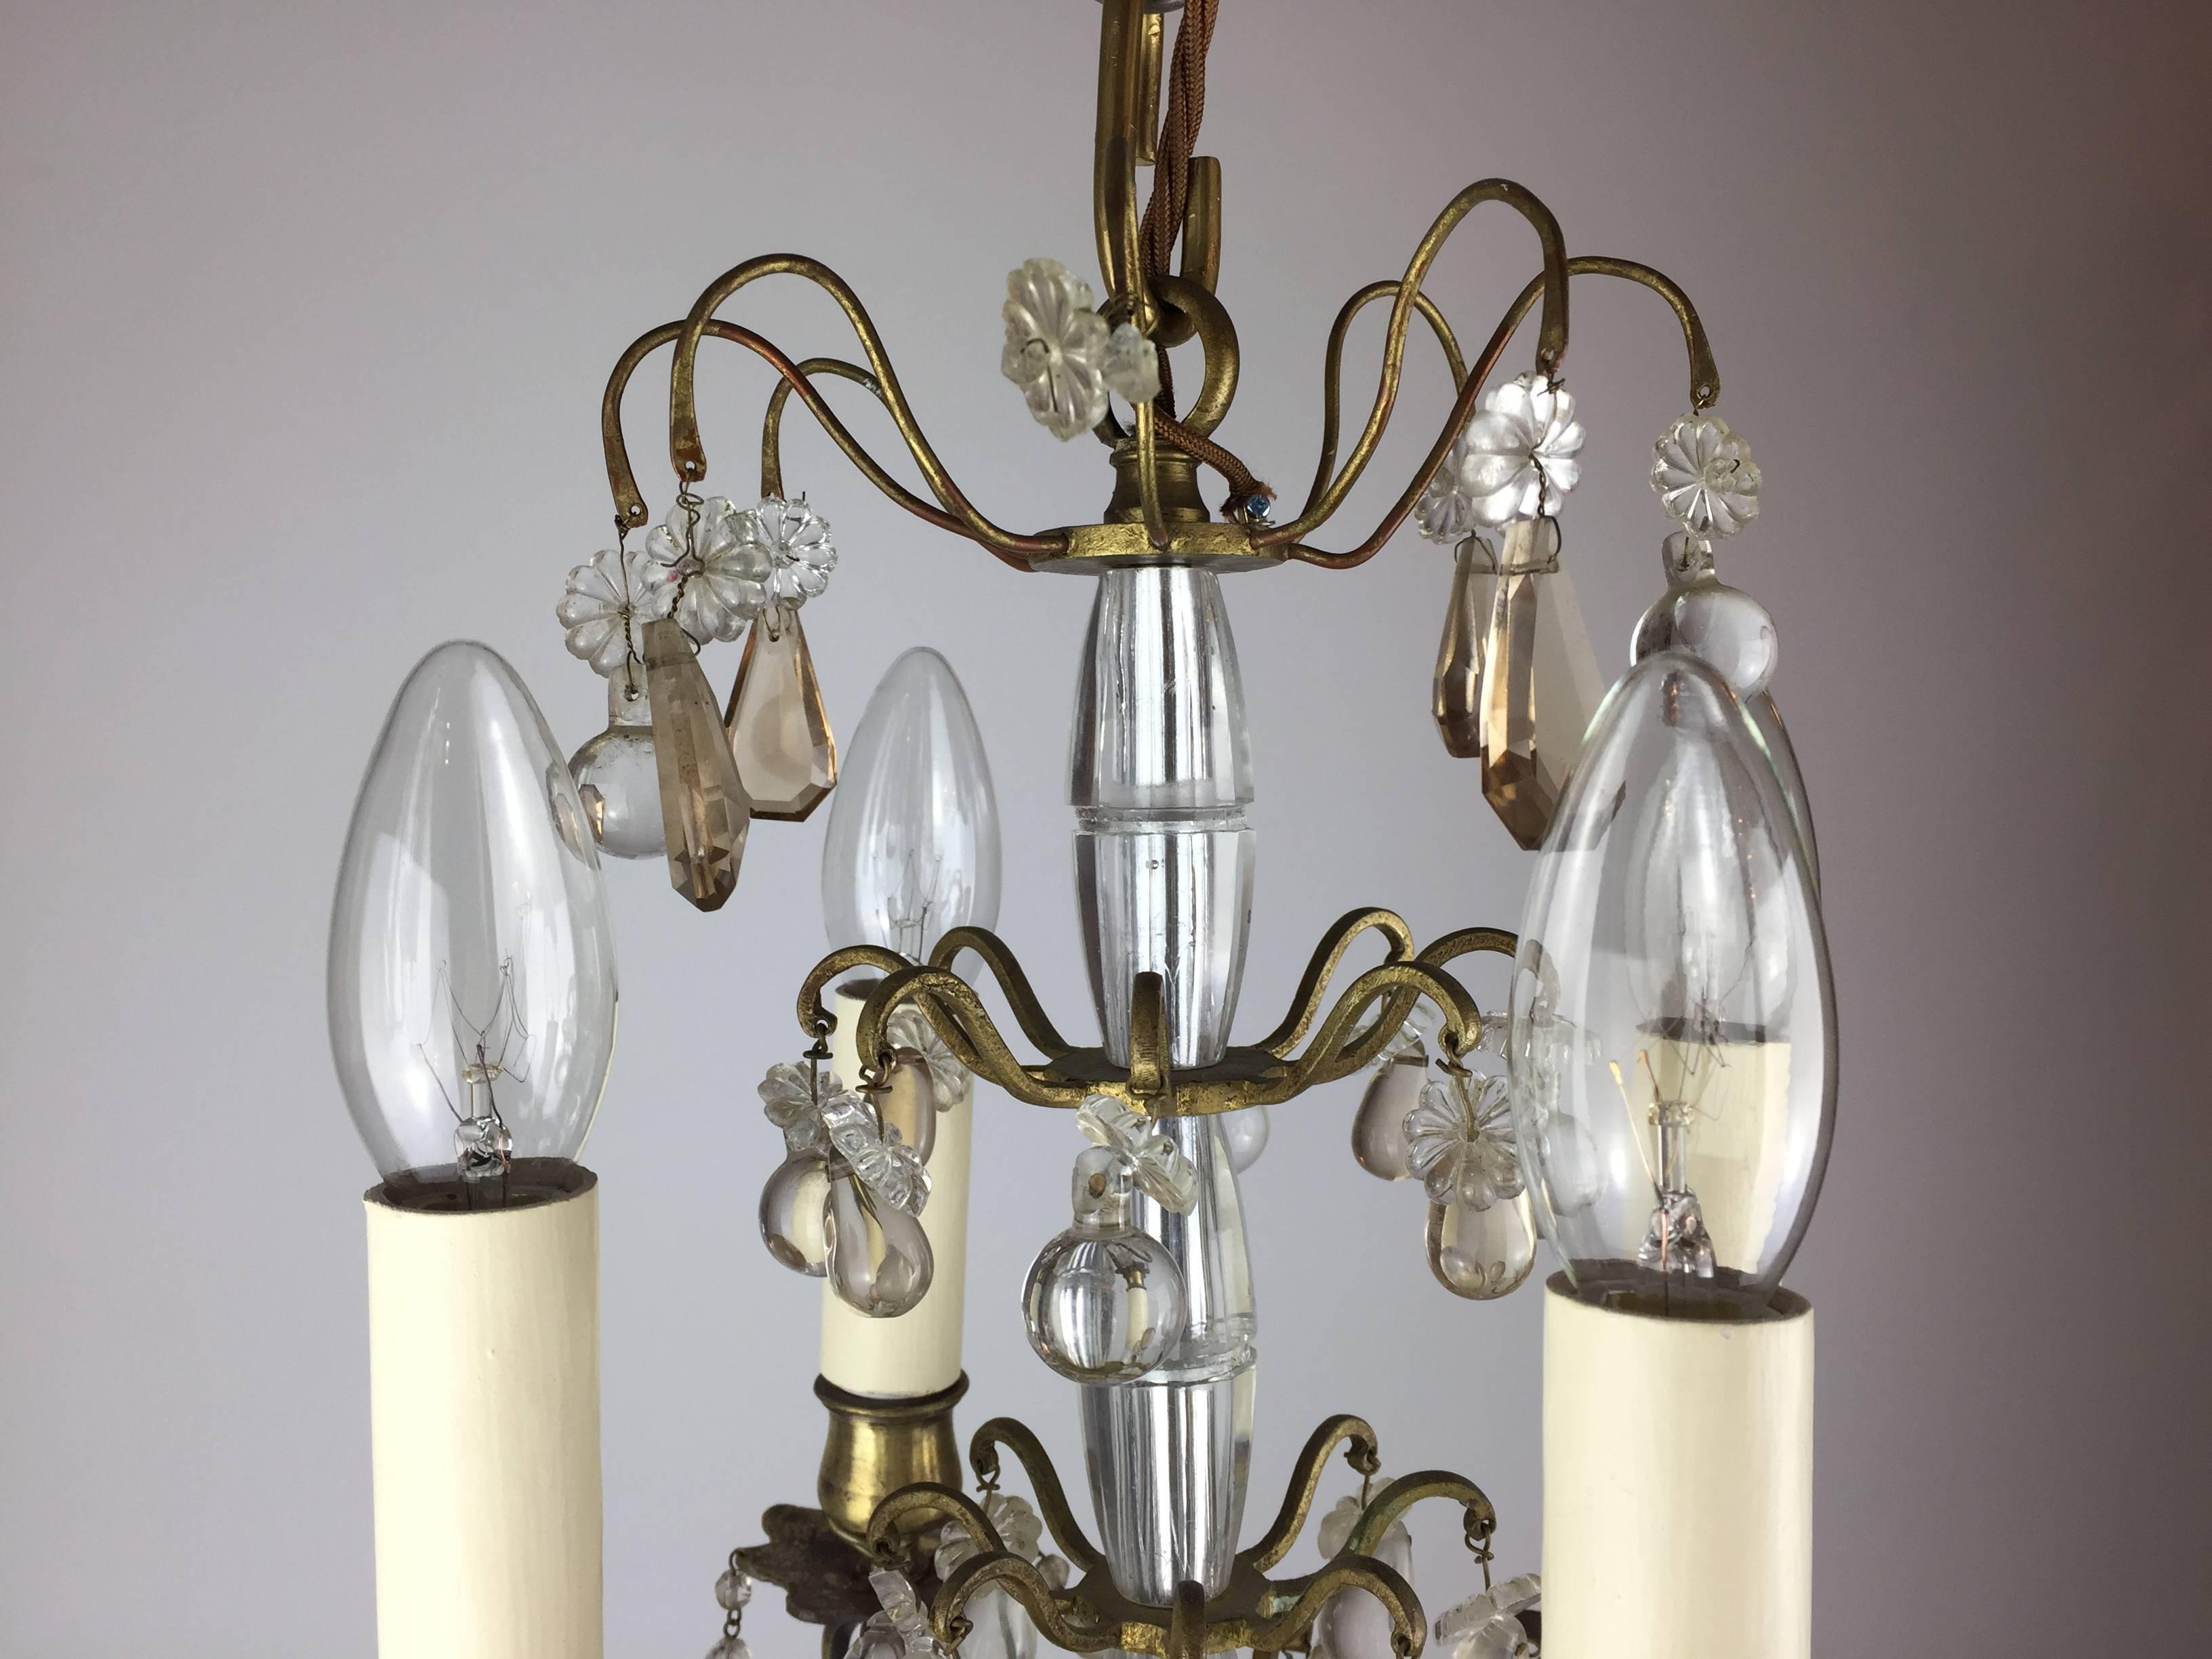 A small, gilt brass and cut-glass chandelier. Four arms of light, emulating from a glass column, hug with small clear and colored glass drops.